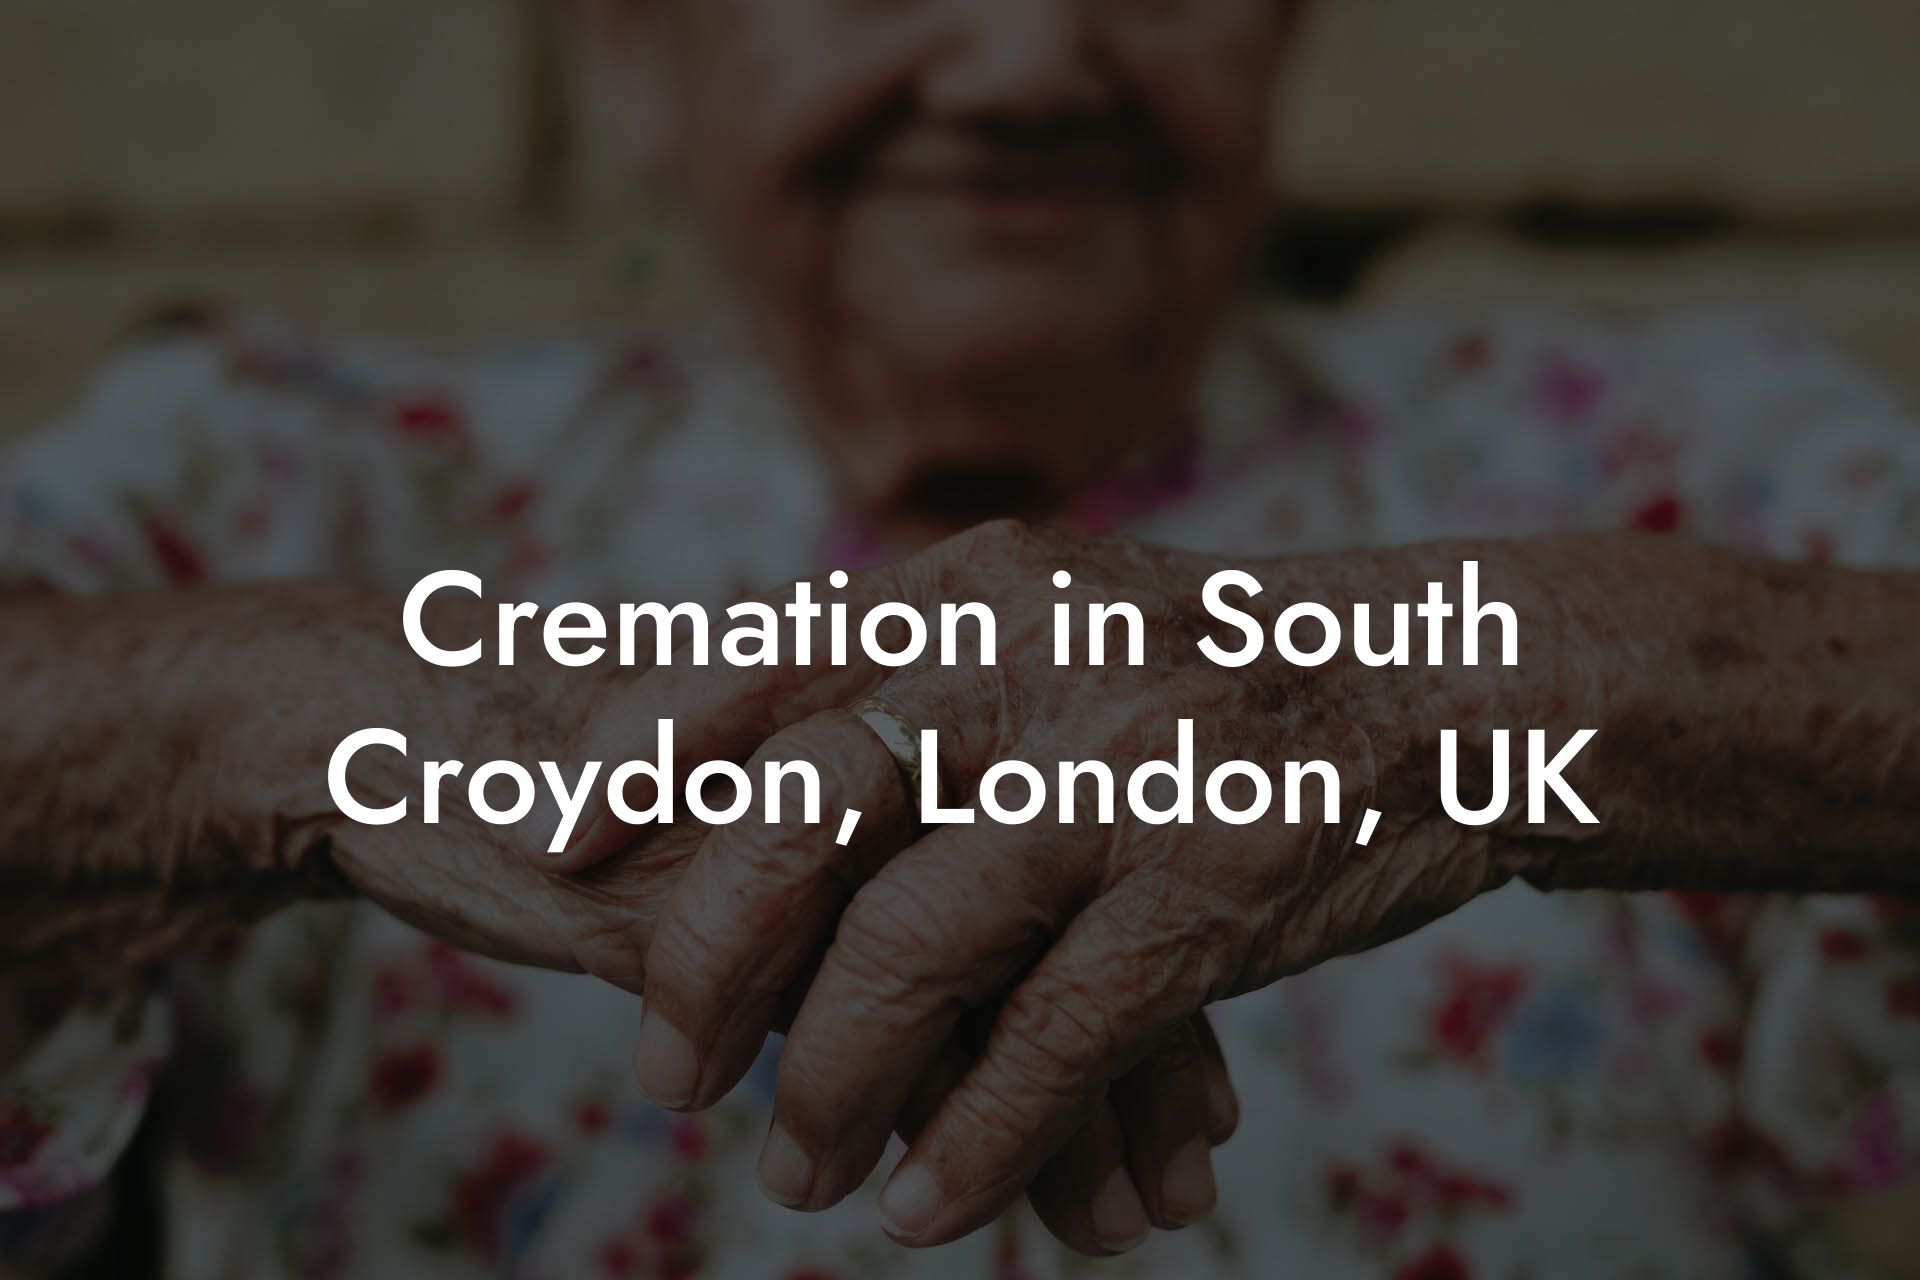 Cremation in South Croydon, London, UK